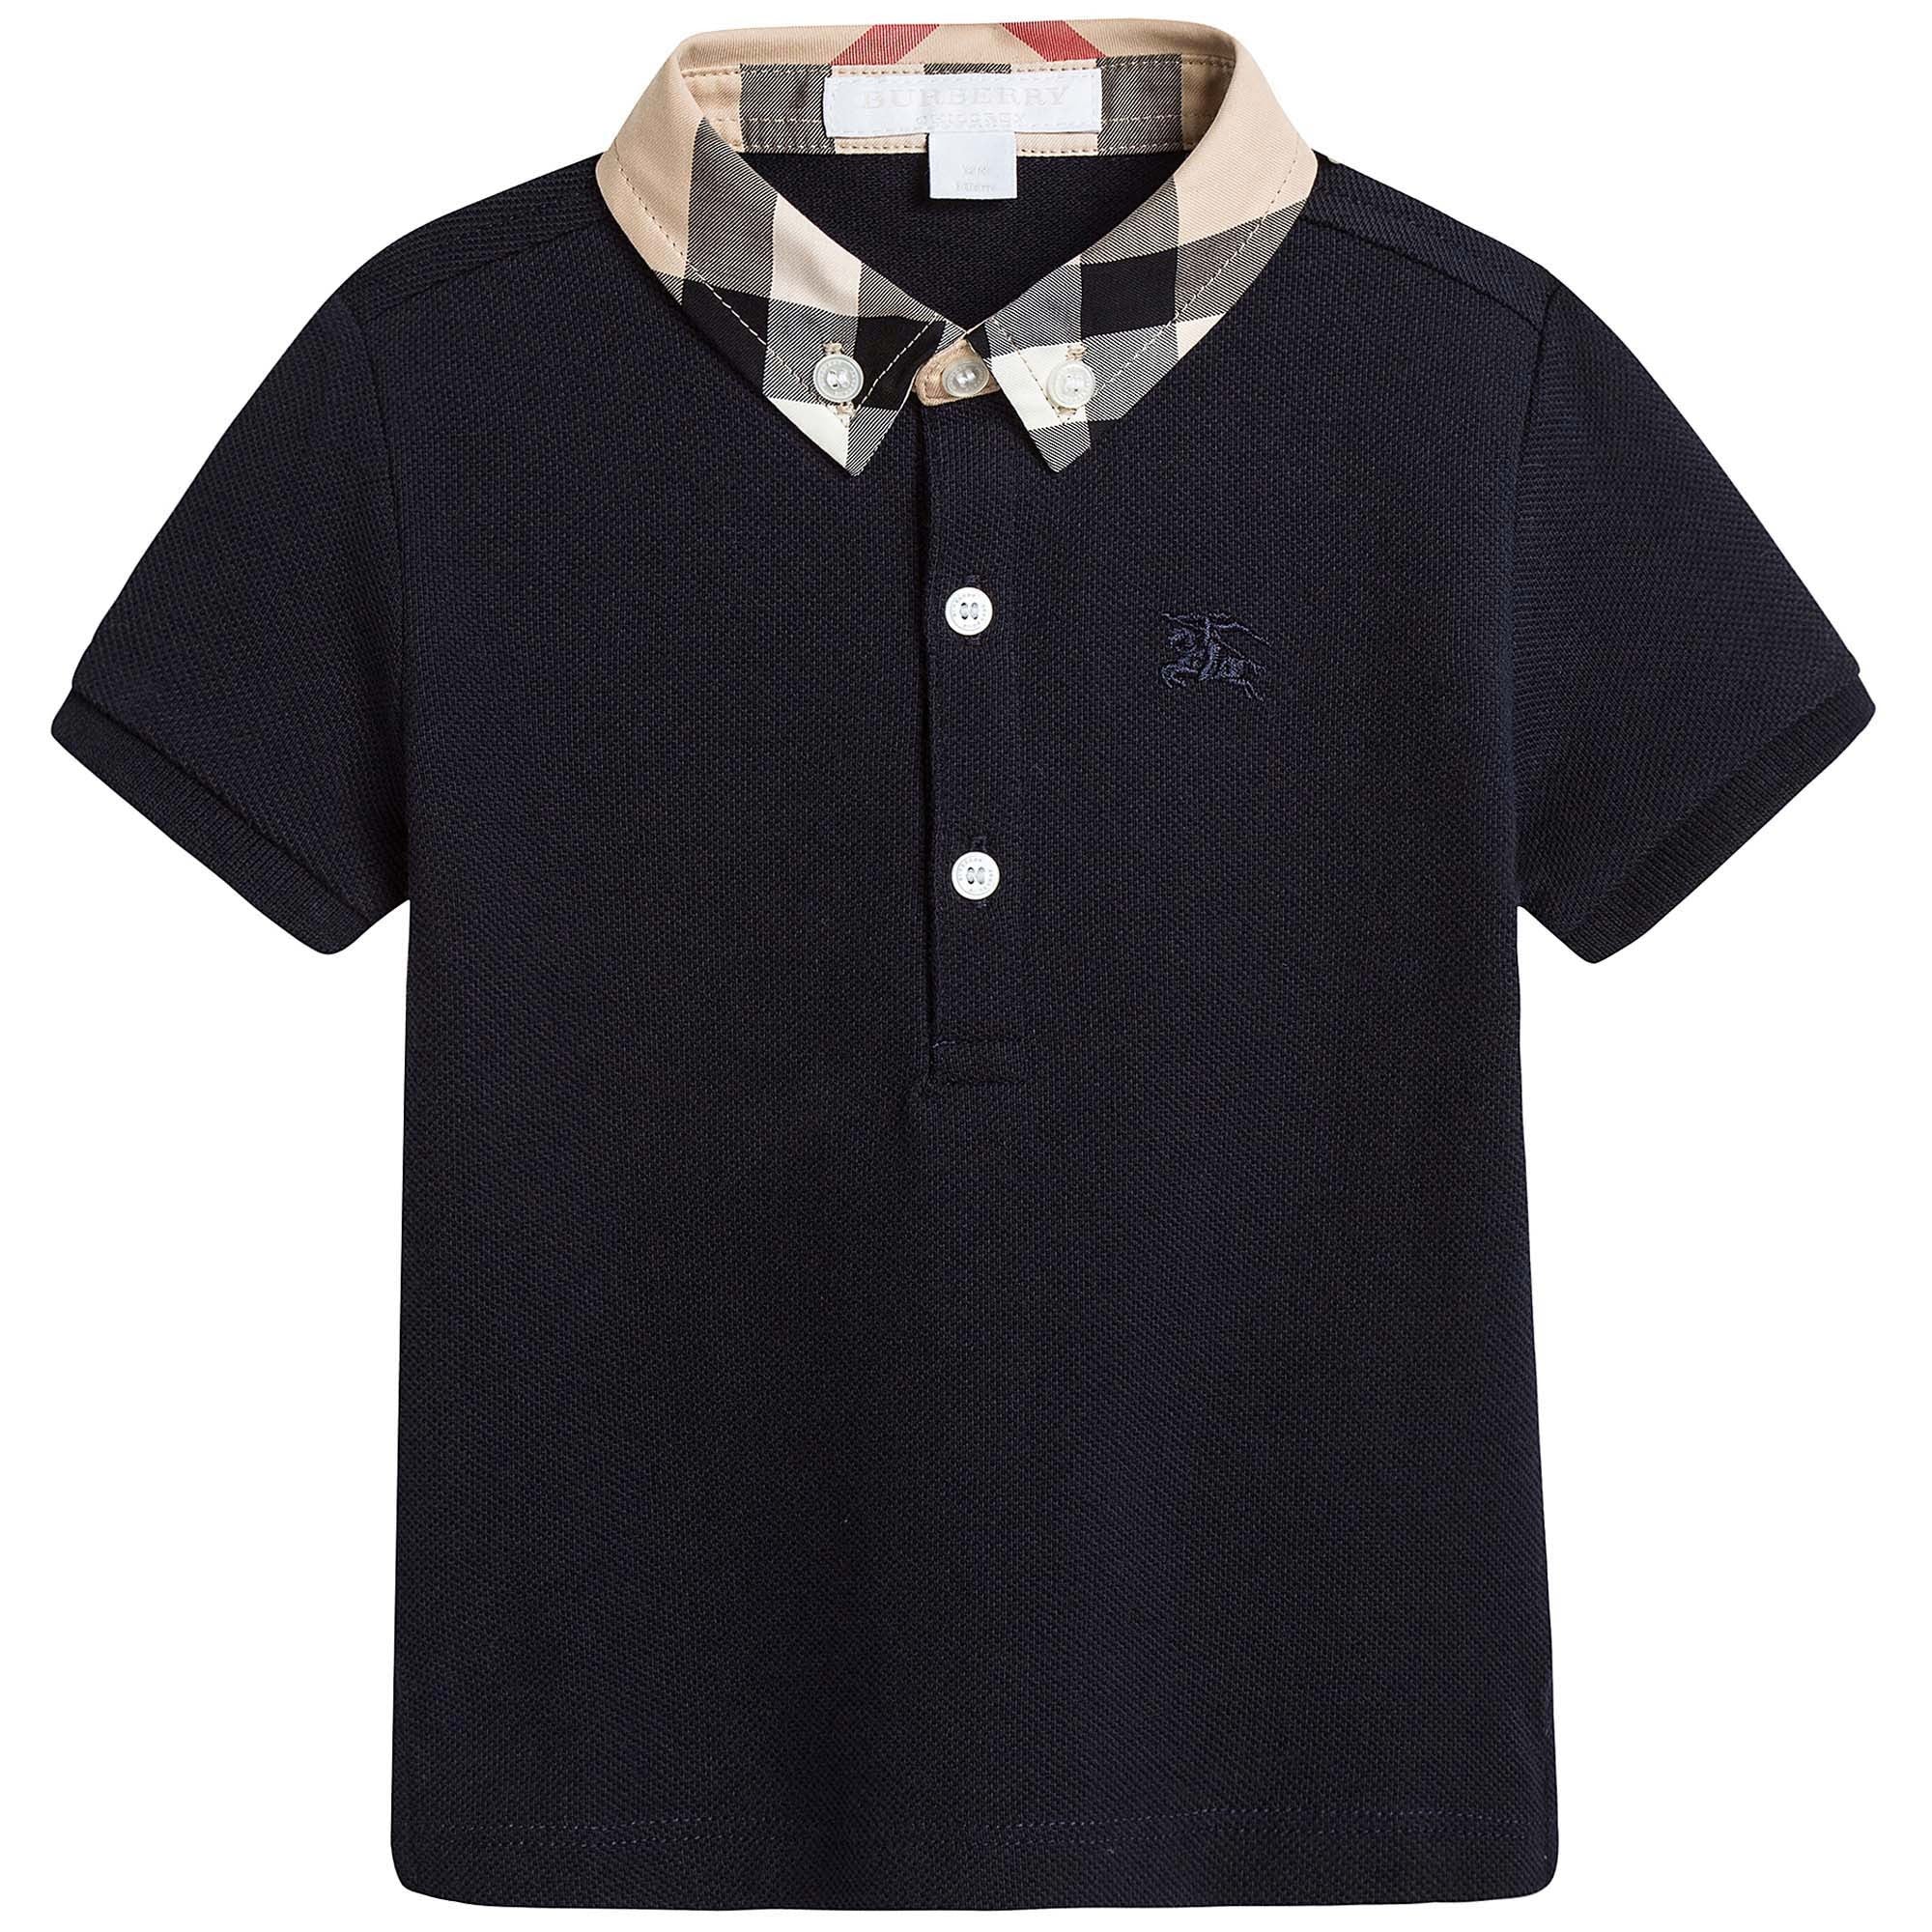 Baby Boys Navy Blue Polo Shirt With Check Collar - CÉMAROSE | Children's Fashion Store - 1